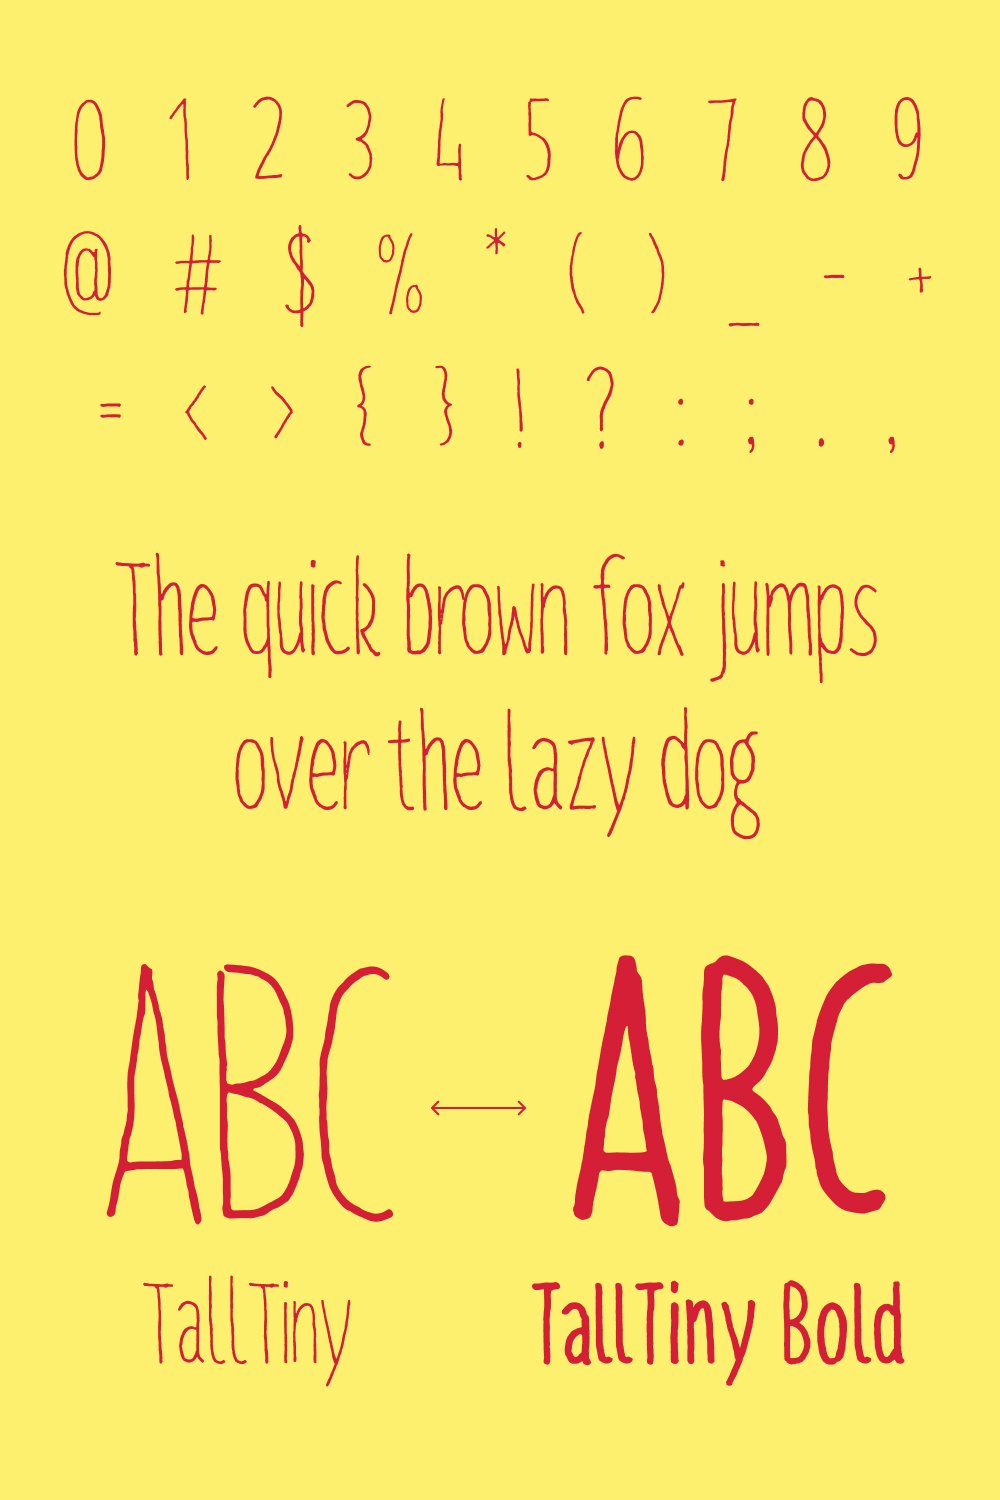 Numbers and punctuation of tall tiny font.